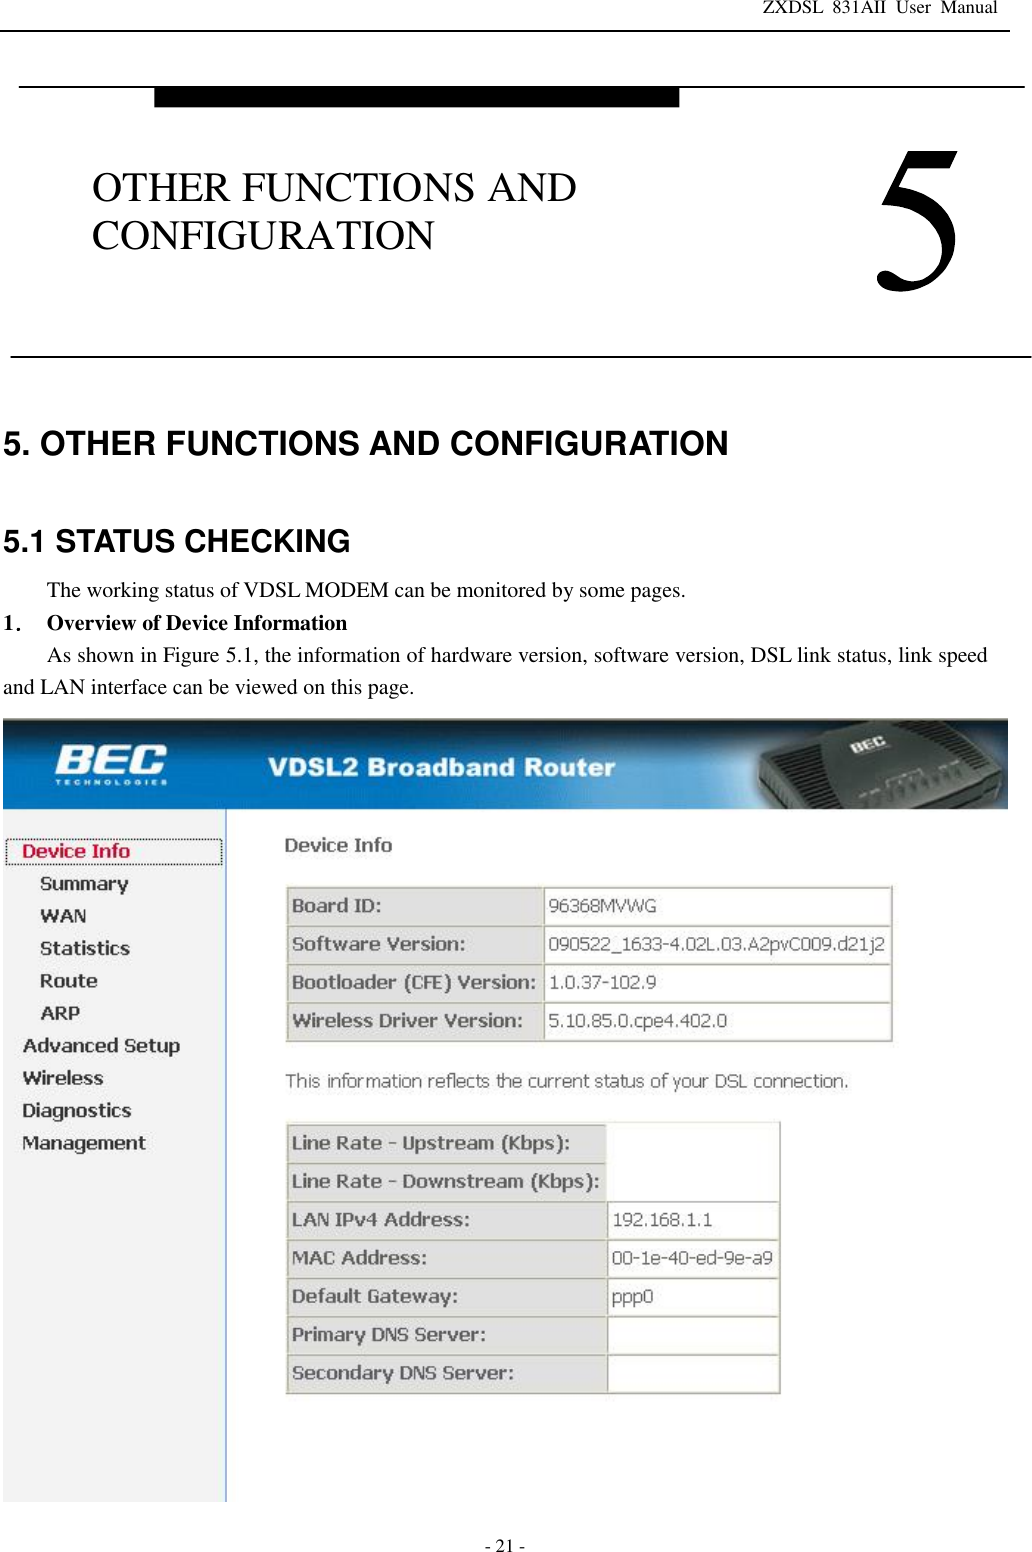 ZXDSL 831AII User Manual  - 21 - 5. OTHER FUNCTIONS AND CONFIGURATION  5.1 STATUS CHECKING The working status of VDSL MODEM can be monitored by some pages. 1． Overview of Device Information As shown in Figure 5.1, the information of hardware version, software version, DSL link status, link speed and LAN interface can be viewed on this page.   OTHER FUNCTIONS AND CONFIGURATION 